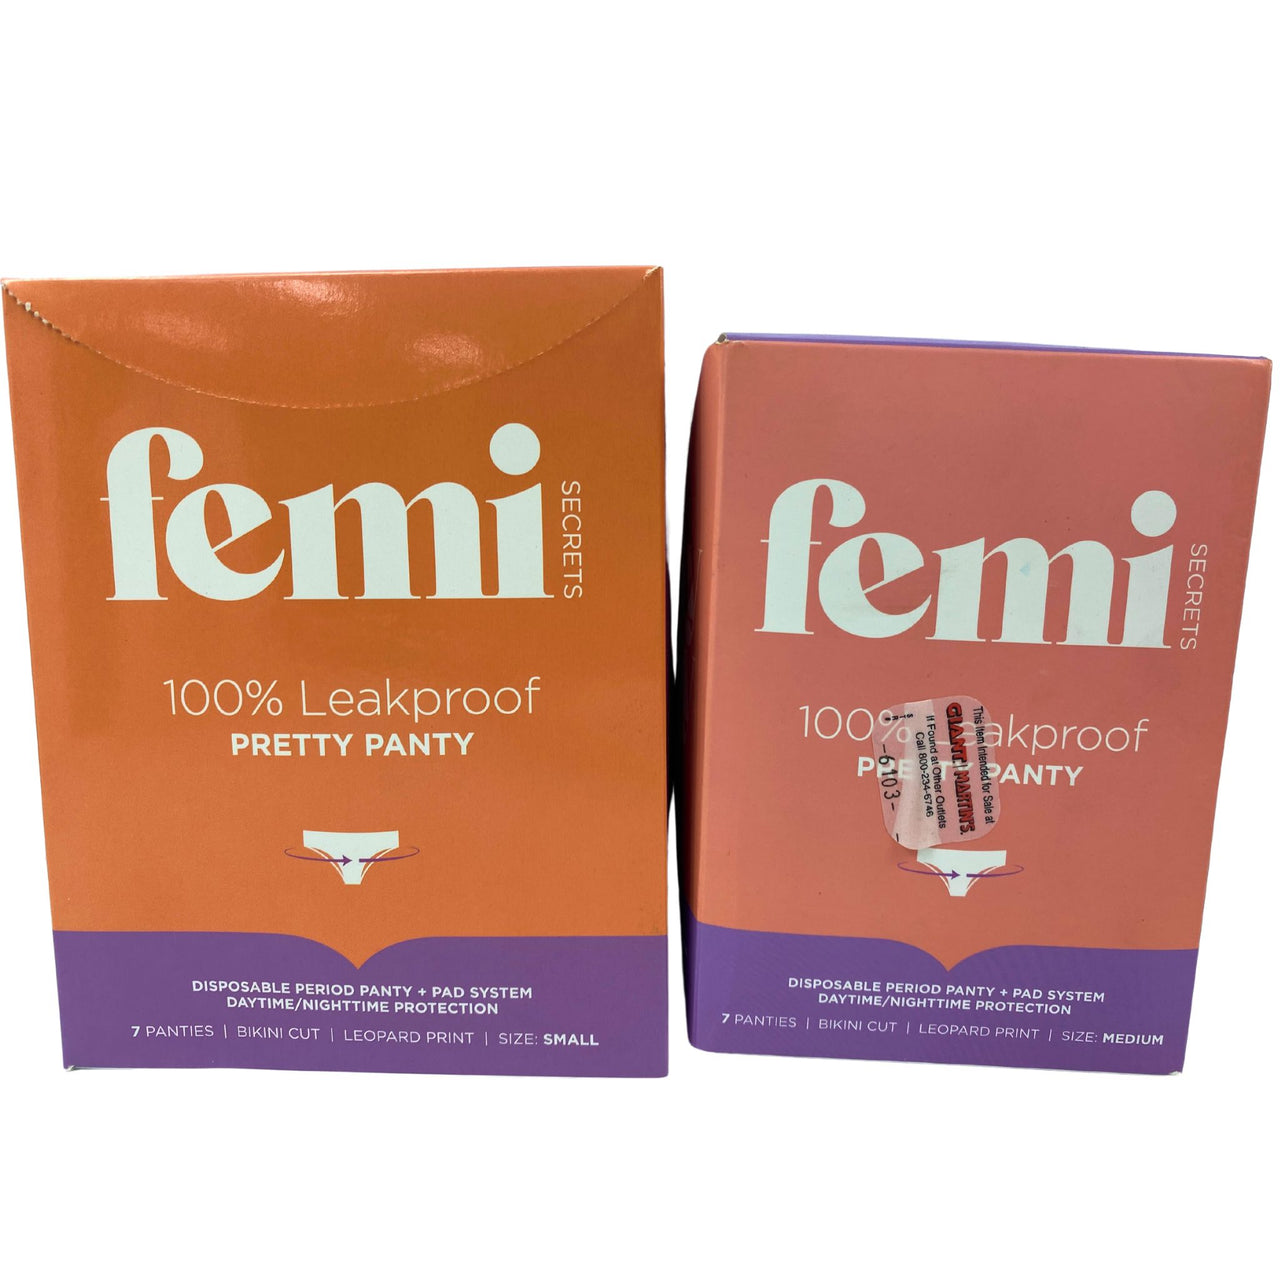 Femi 100% Leakproof Pretty Panty Disposable Period Panty + Pad System Daytime/Nighttime 